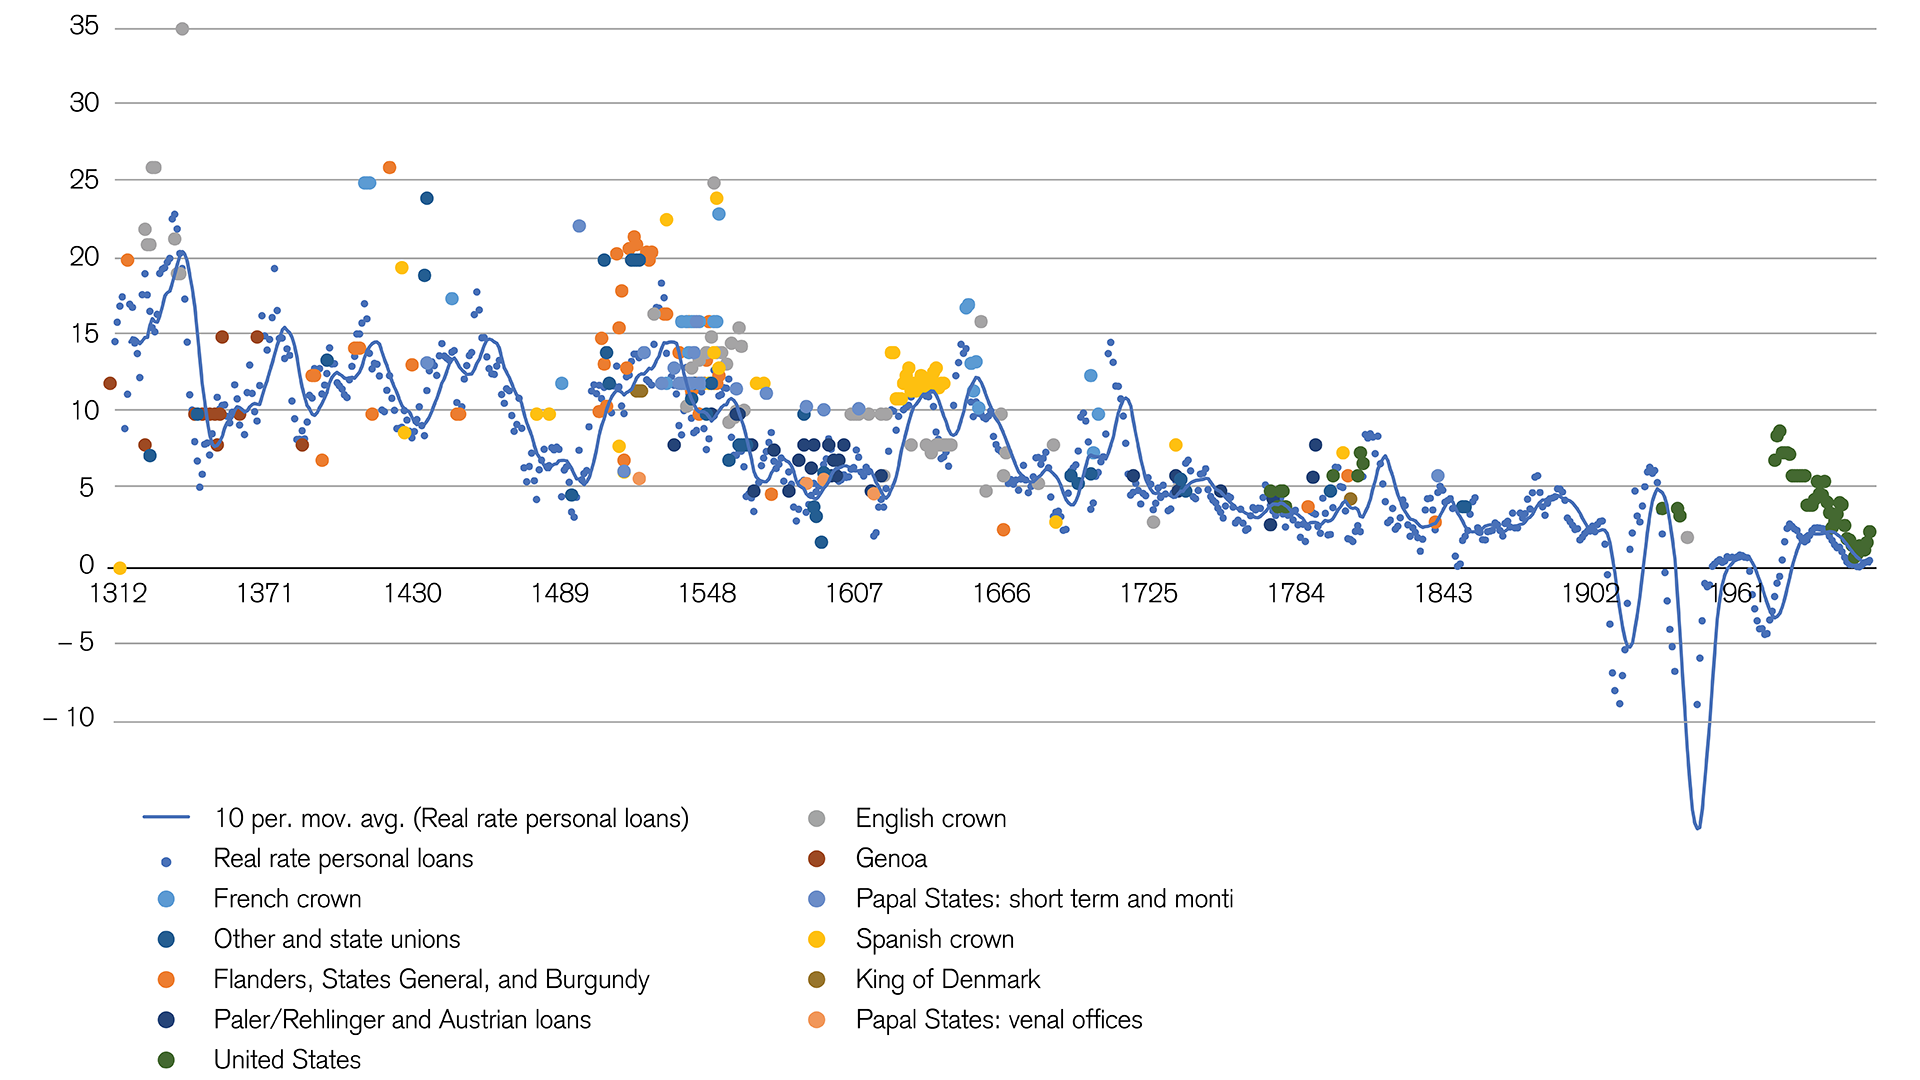 Interest rates: Trend for the past 700 years